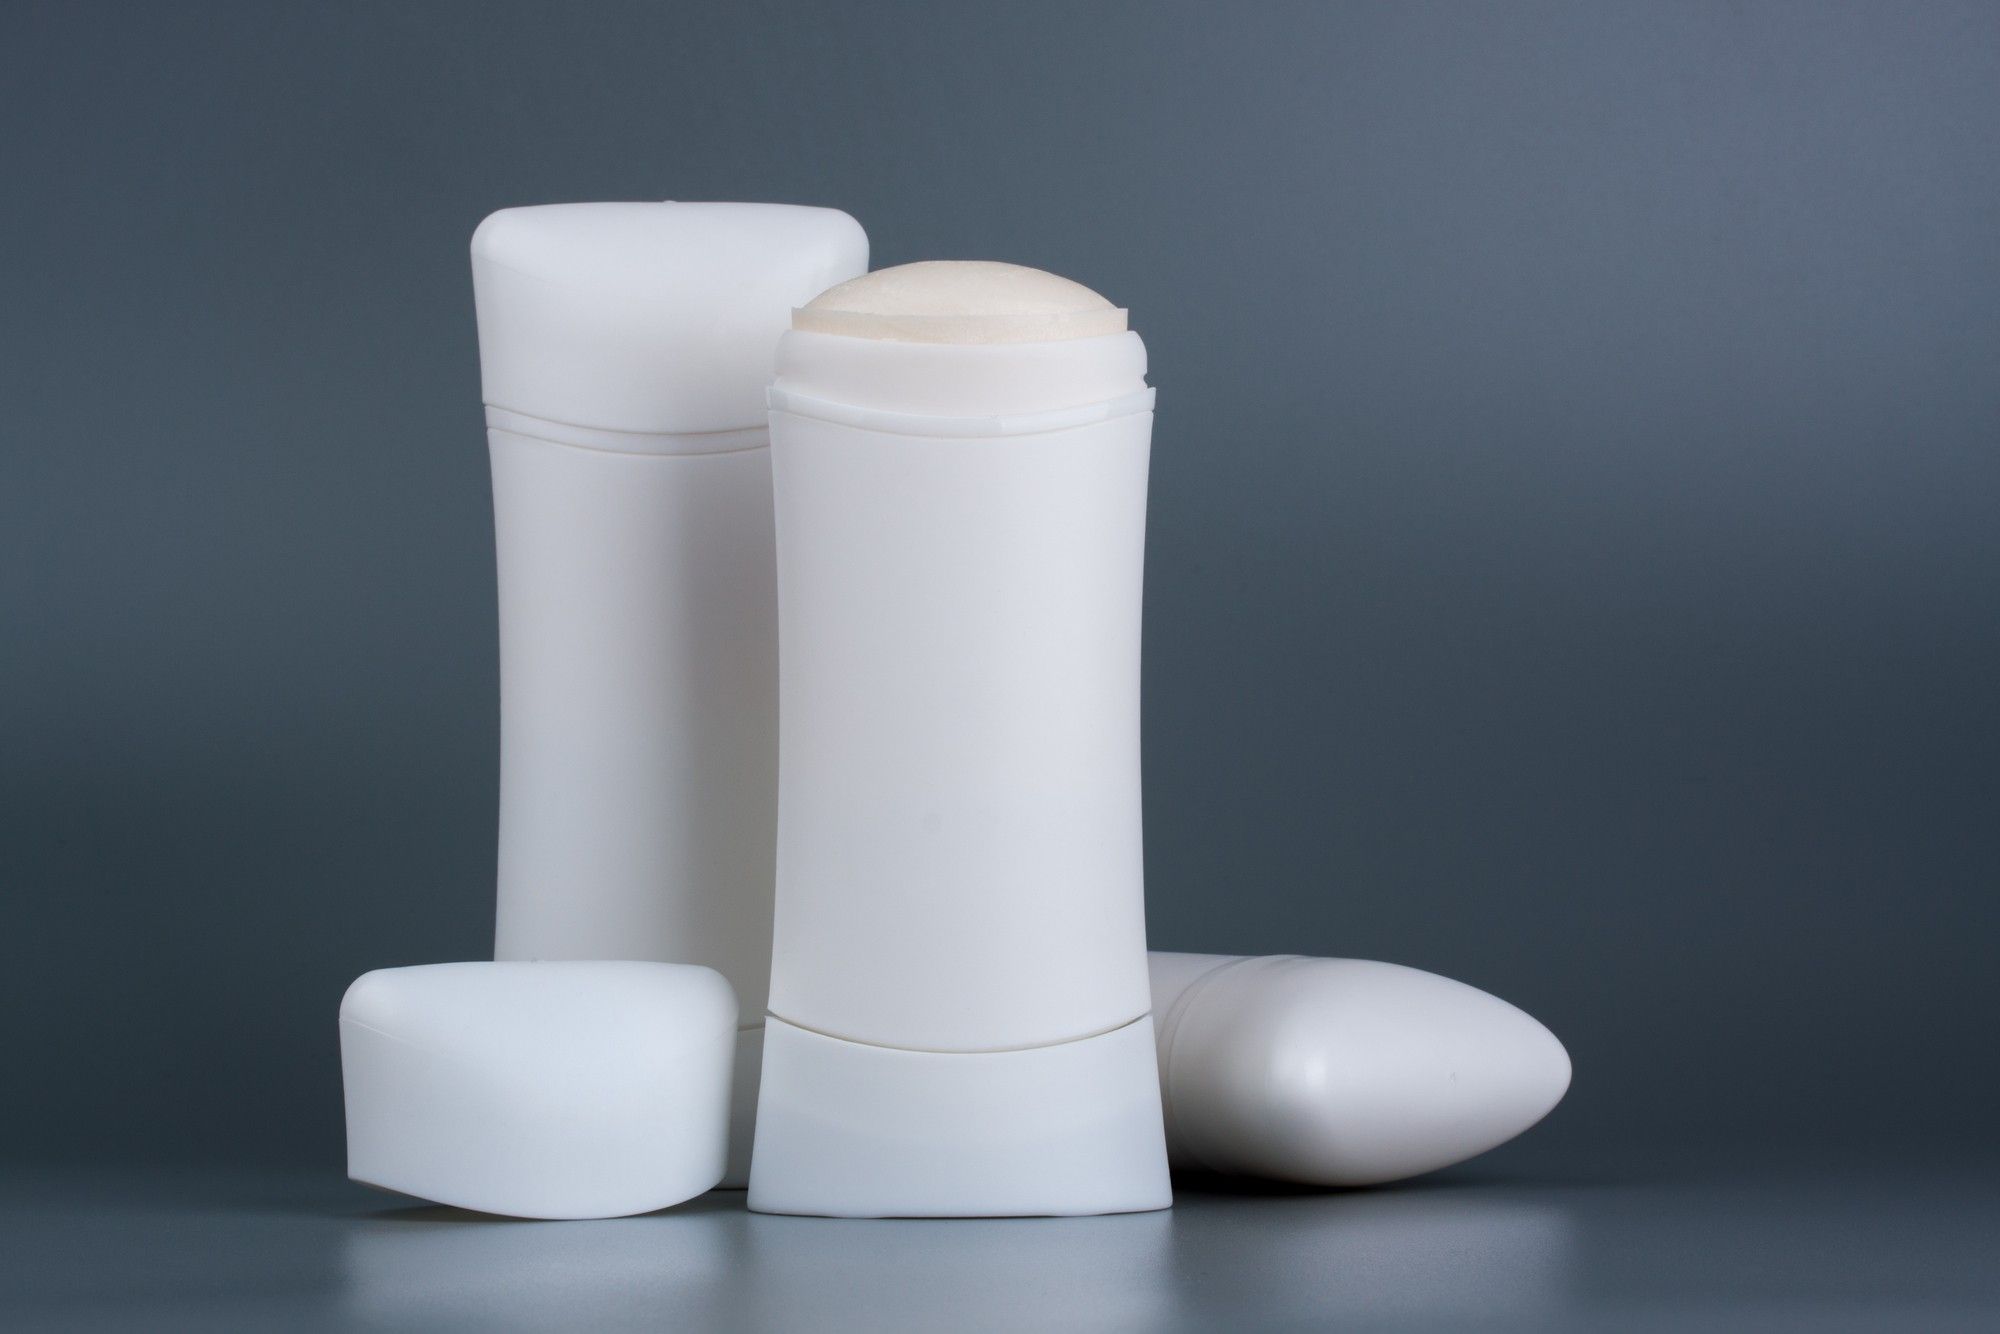 Dove deodorant and other products from Degree and Axe allegedly contain too much empty space.